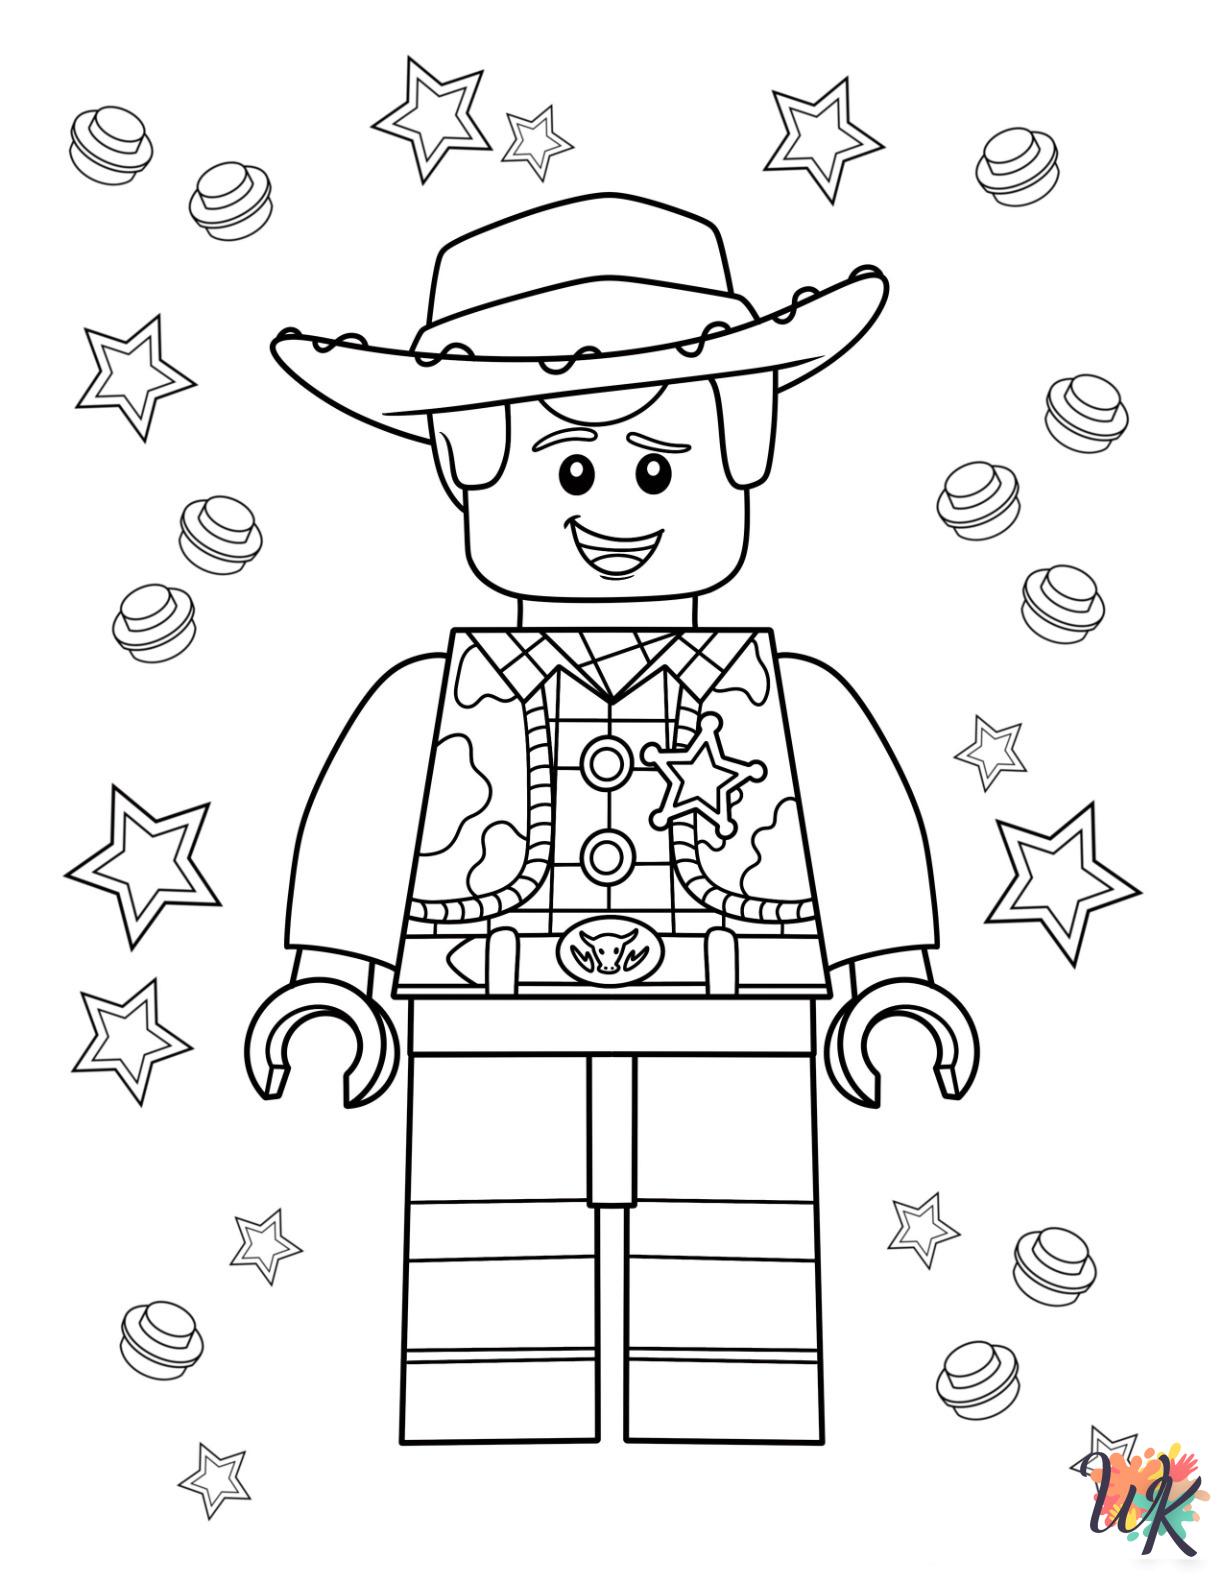 Woody cards coloring pages